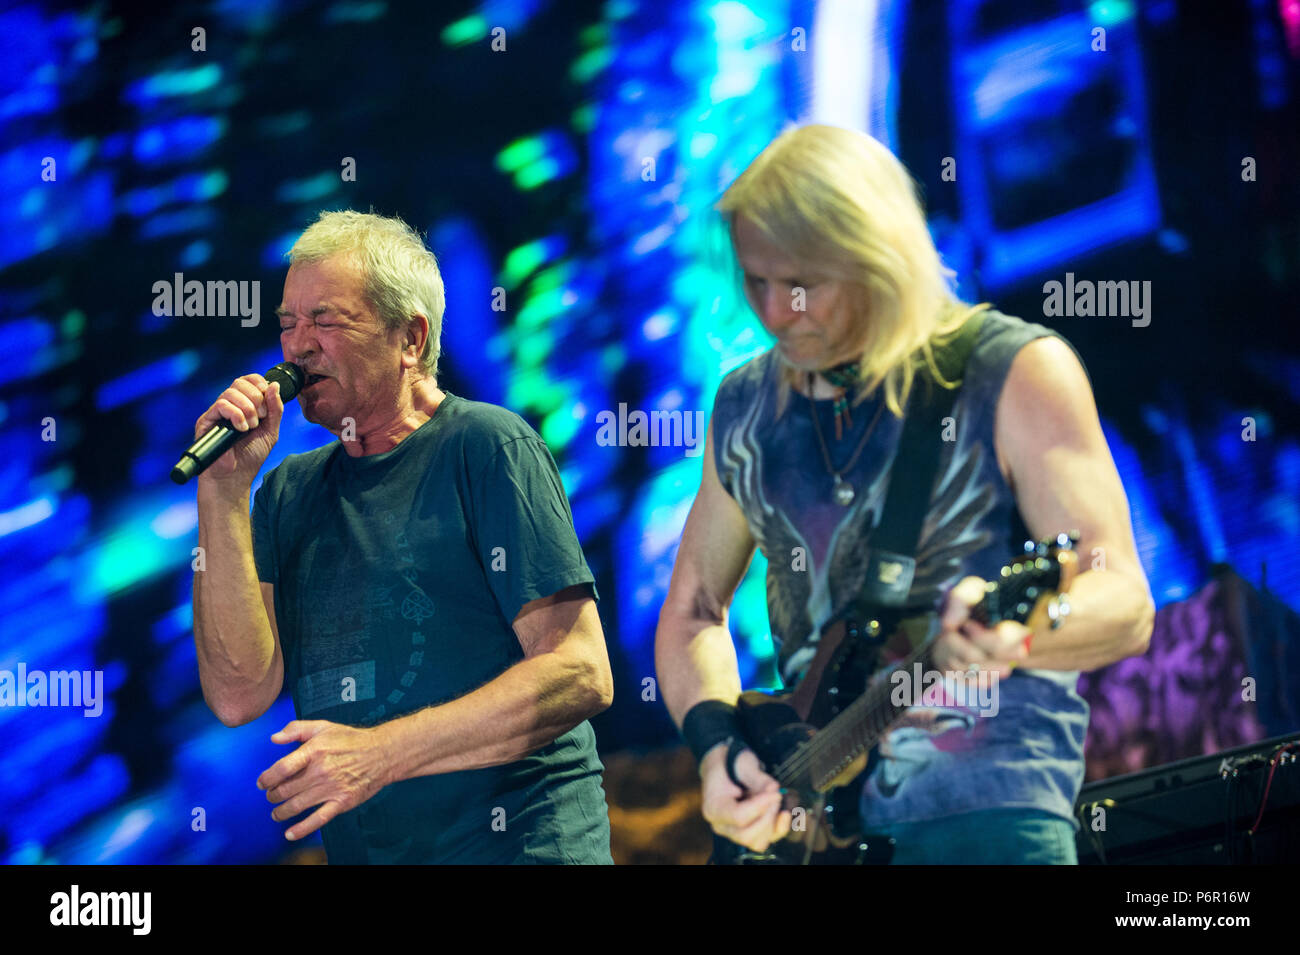 Deep Purple vocalist, Ian Gillan and Deep Purple guitar player, Steve Morse perform. Deep purple band performs at Tauron Arena Krakow as part of the farewell tour, The Long Goodbye Tour. Stock Photo